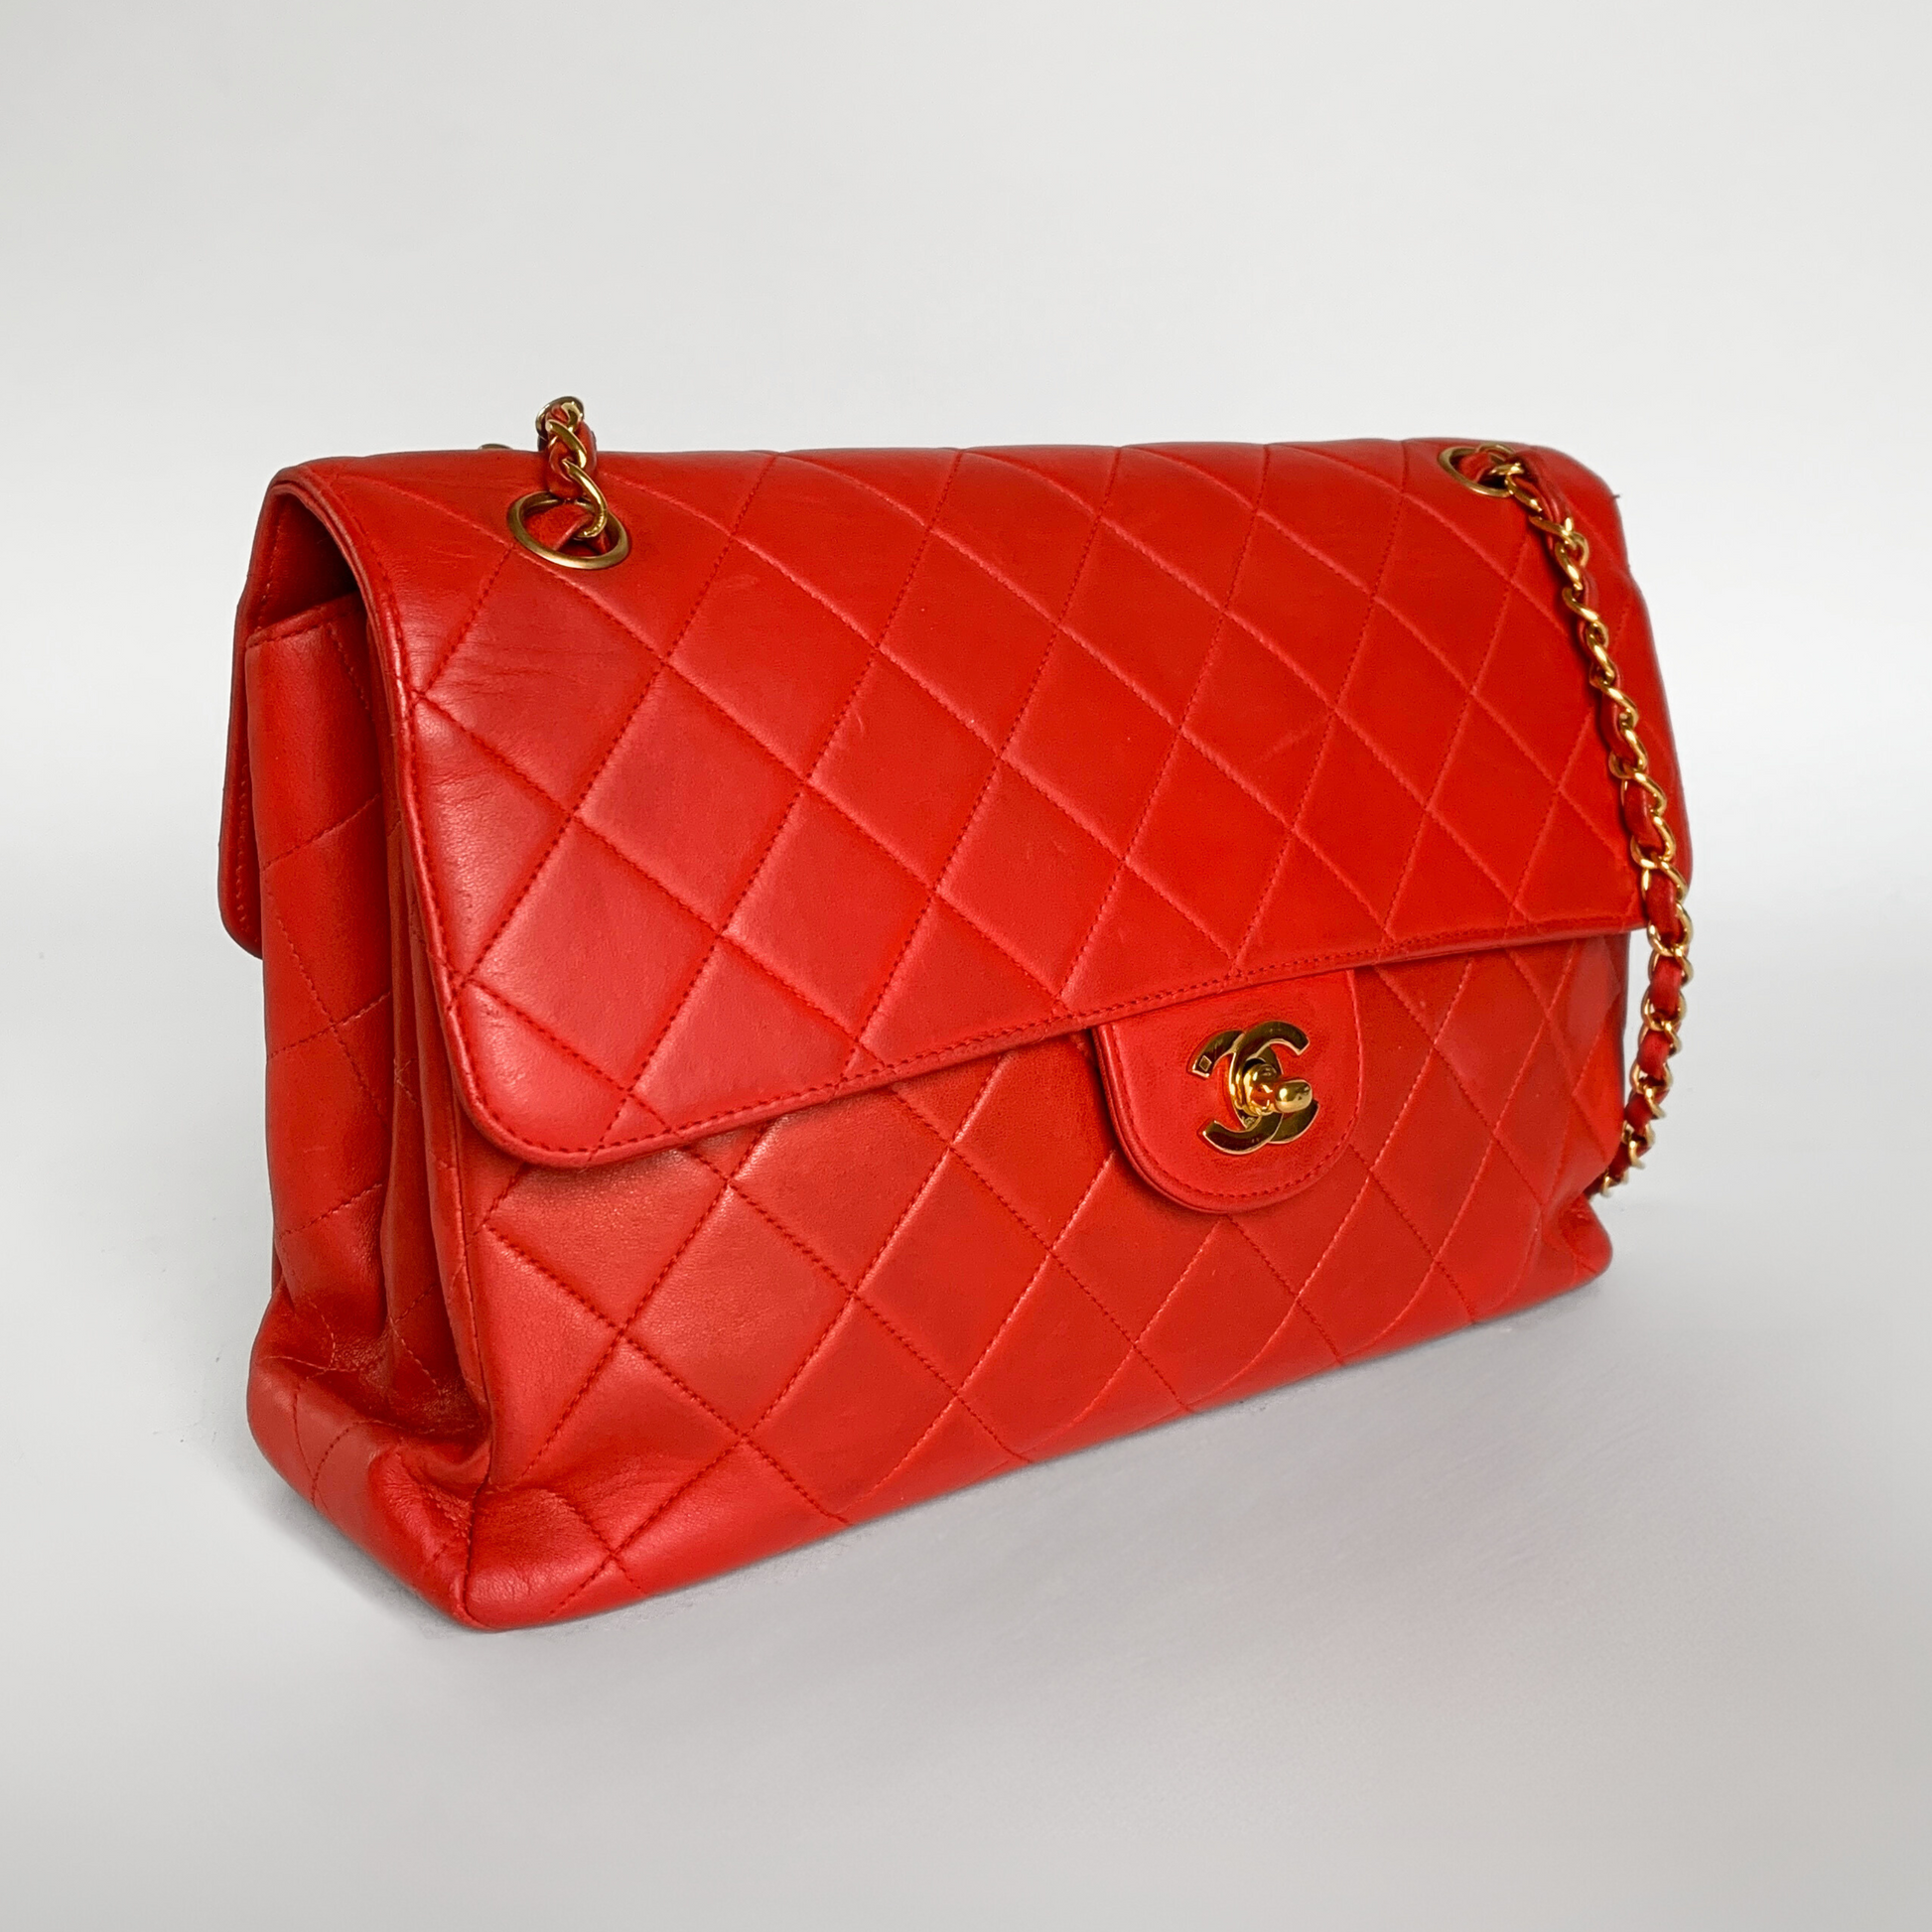 Chanel Chanel Red Maxi Classic Flapbag Double (Limited Edition) - Shoulder bags - Etoile Luxury Vintage